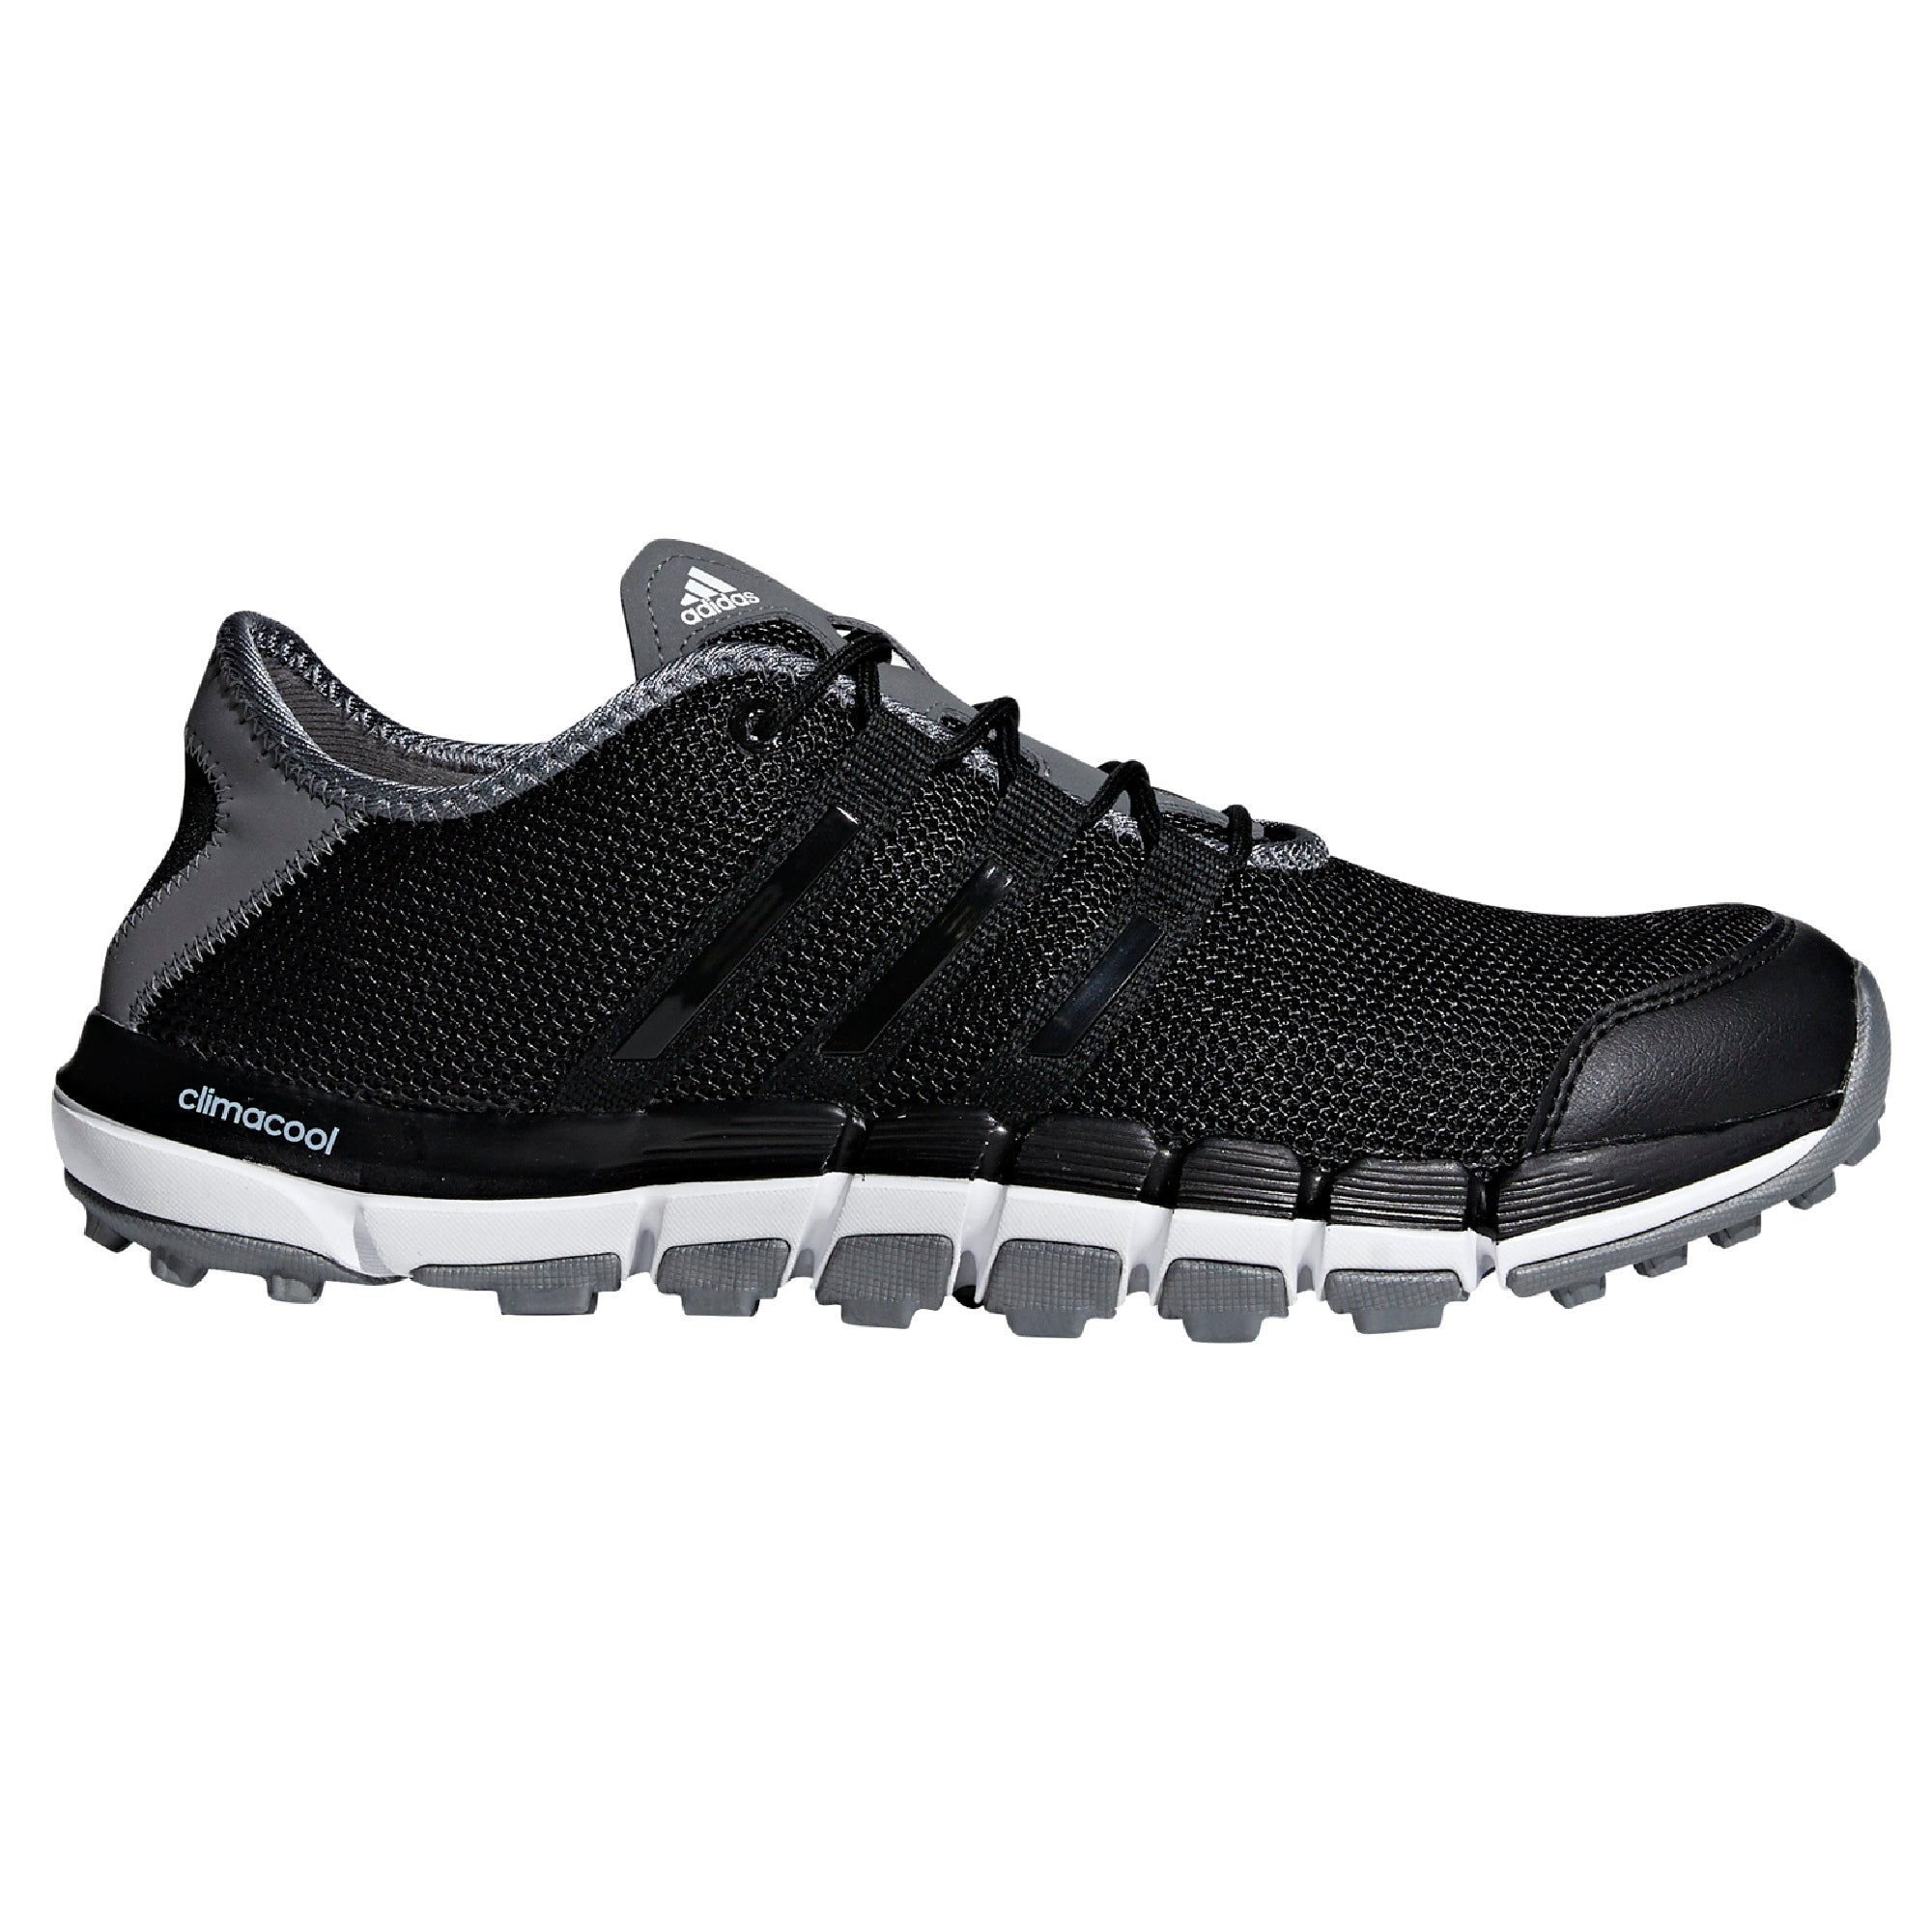 adidas climacool golf shoes 10.5